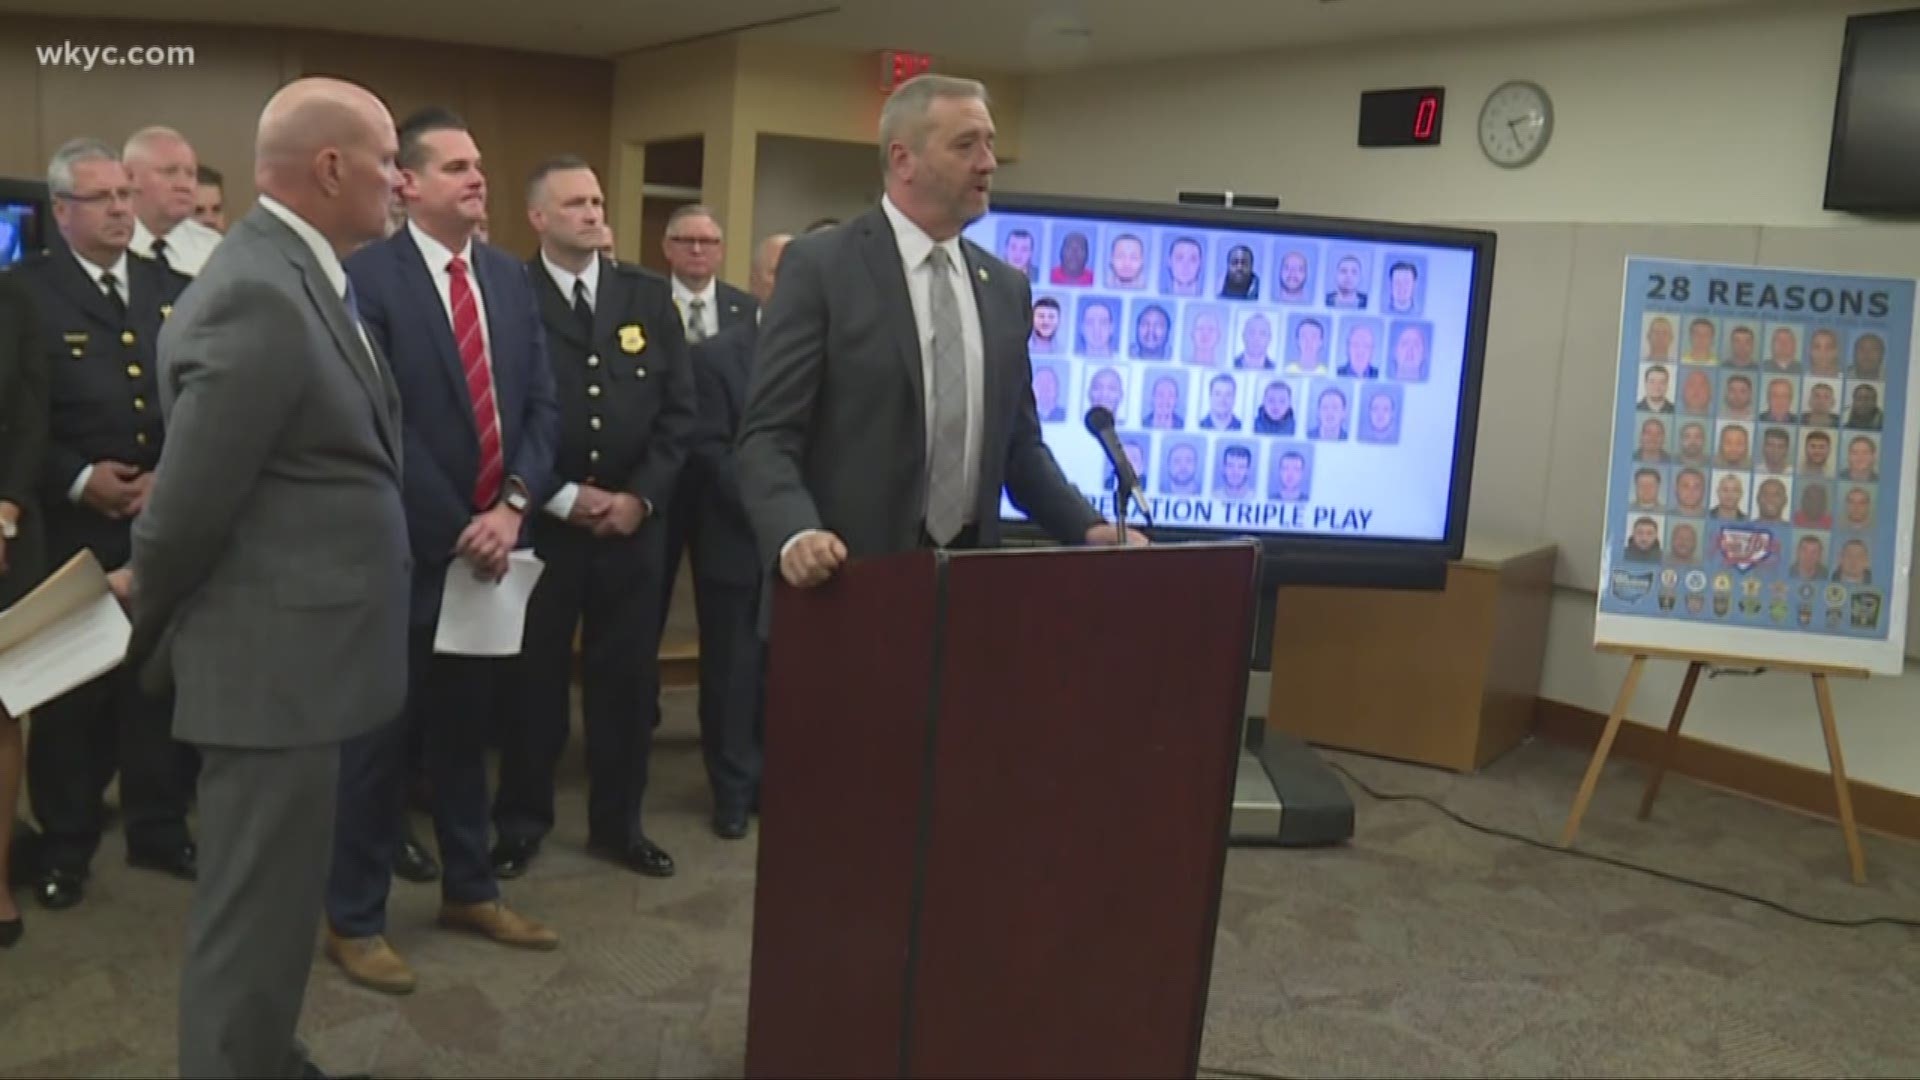 "Operation Home Run" targeted the buyer side of human trafficking of adults in Cuyahoga County. Twenty-one men were arrested and charged with soliciting prostitution within a two-day span.